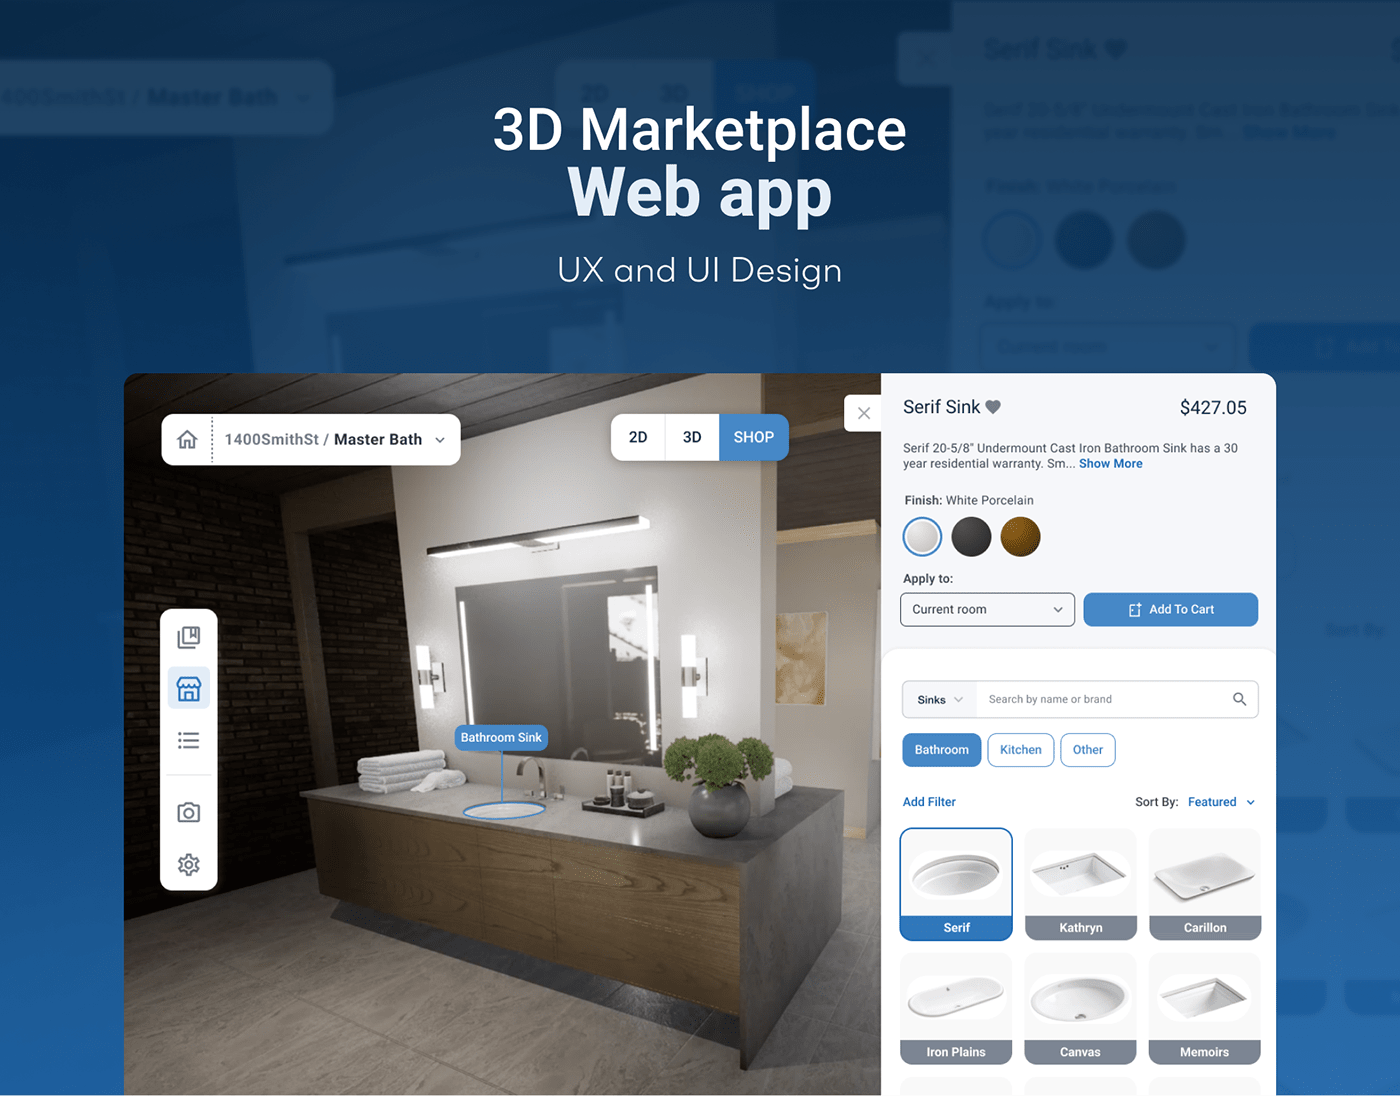 3d marketplace building products design system information architecture  ui design usability testing user experience User research UX design virtualhaus